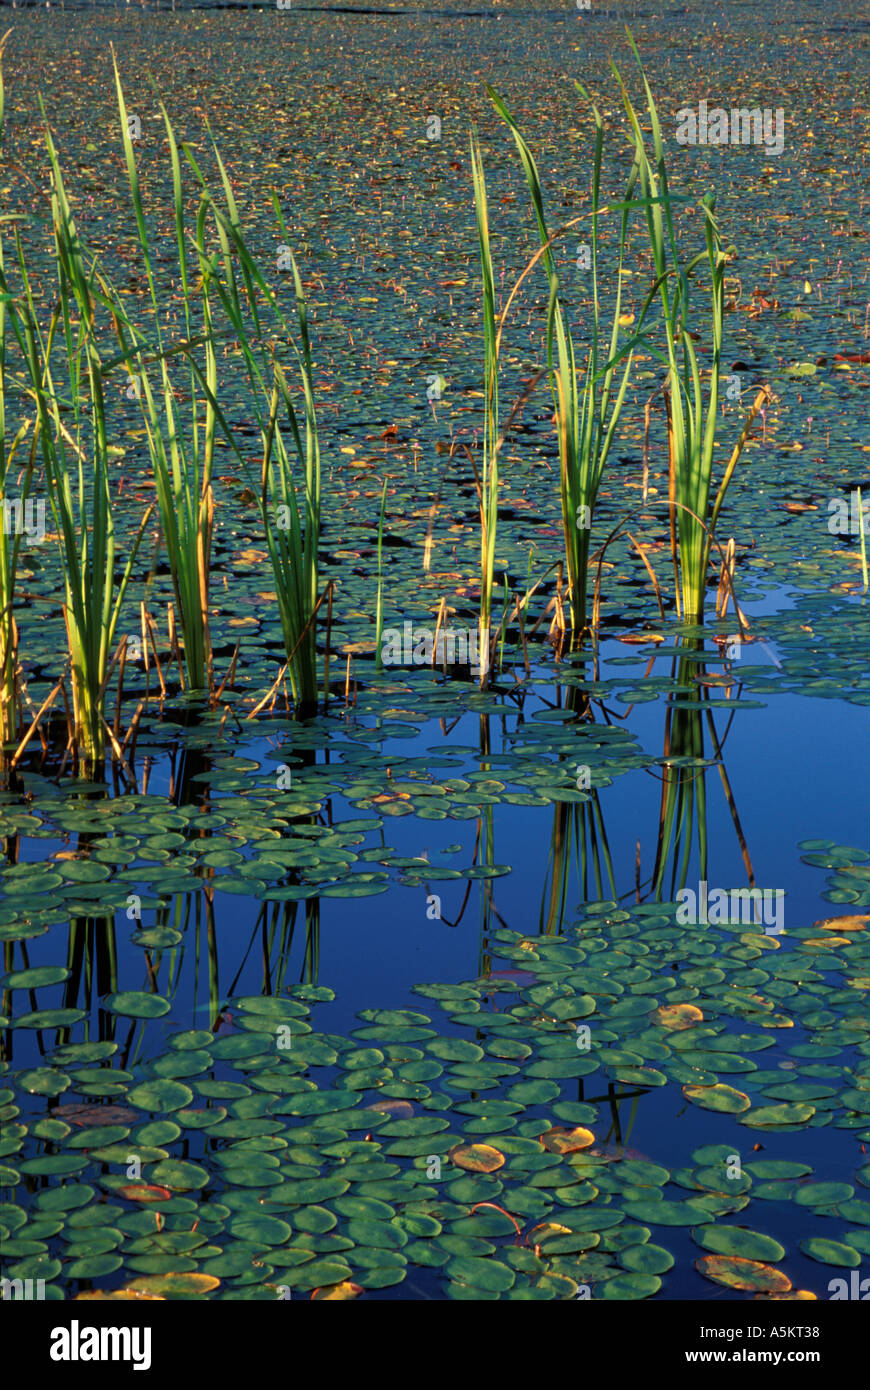 Cattails and lily pads in still water Stock Photo